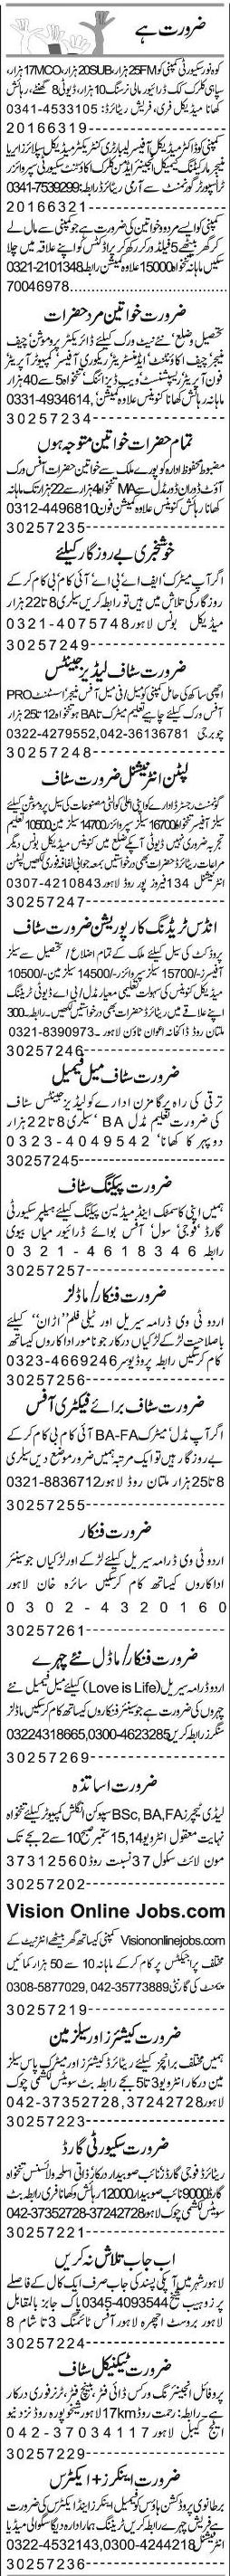 Misc. Jobs in Lahore Classified -2